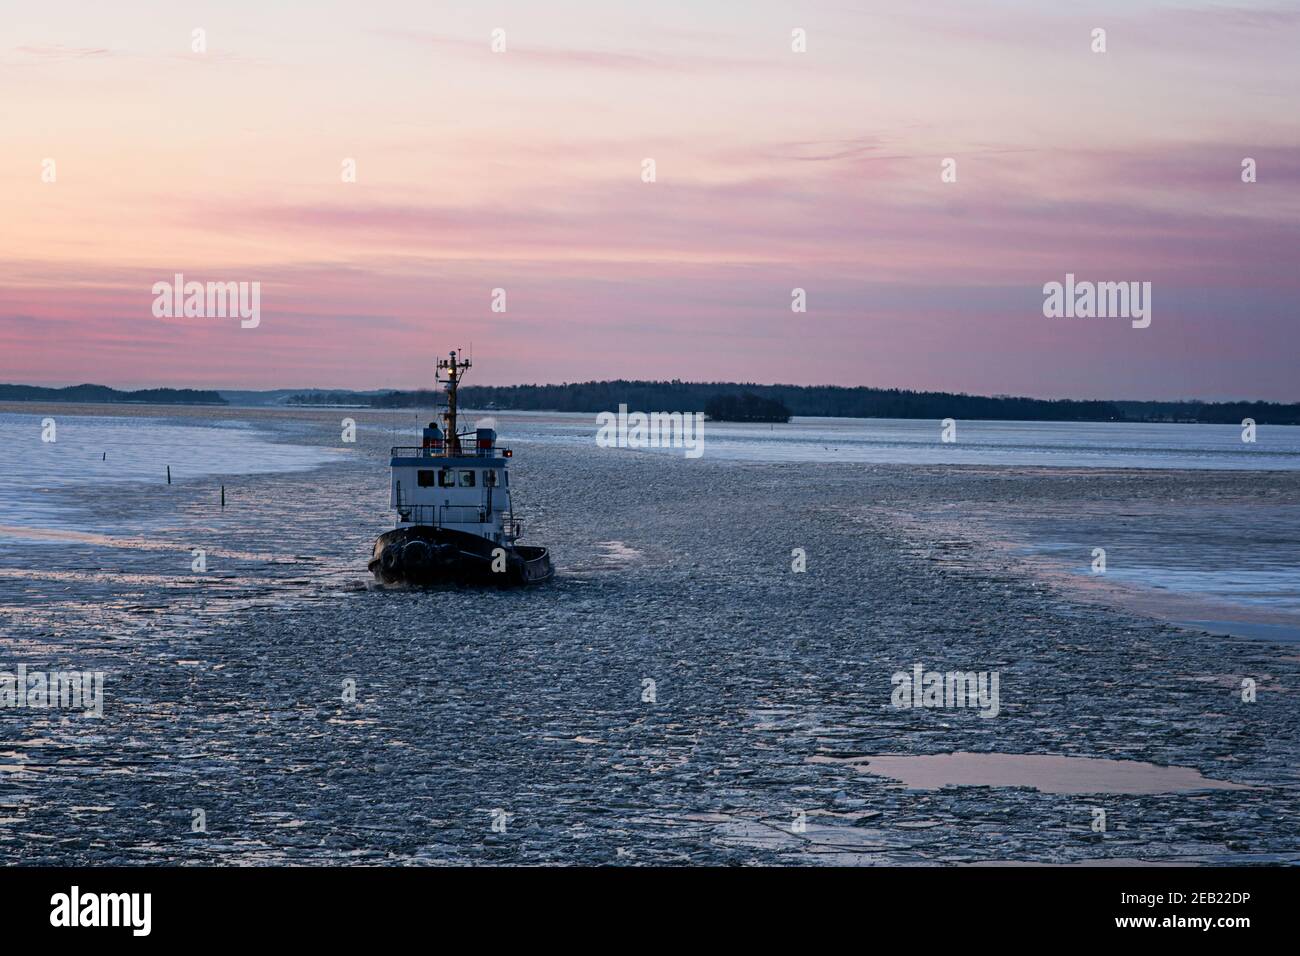 Icebreaker ship breaking through the ice during a beautiful sunset, proving safe waterways for other boats, ships and vessels during winter season. Stock Photo